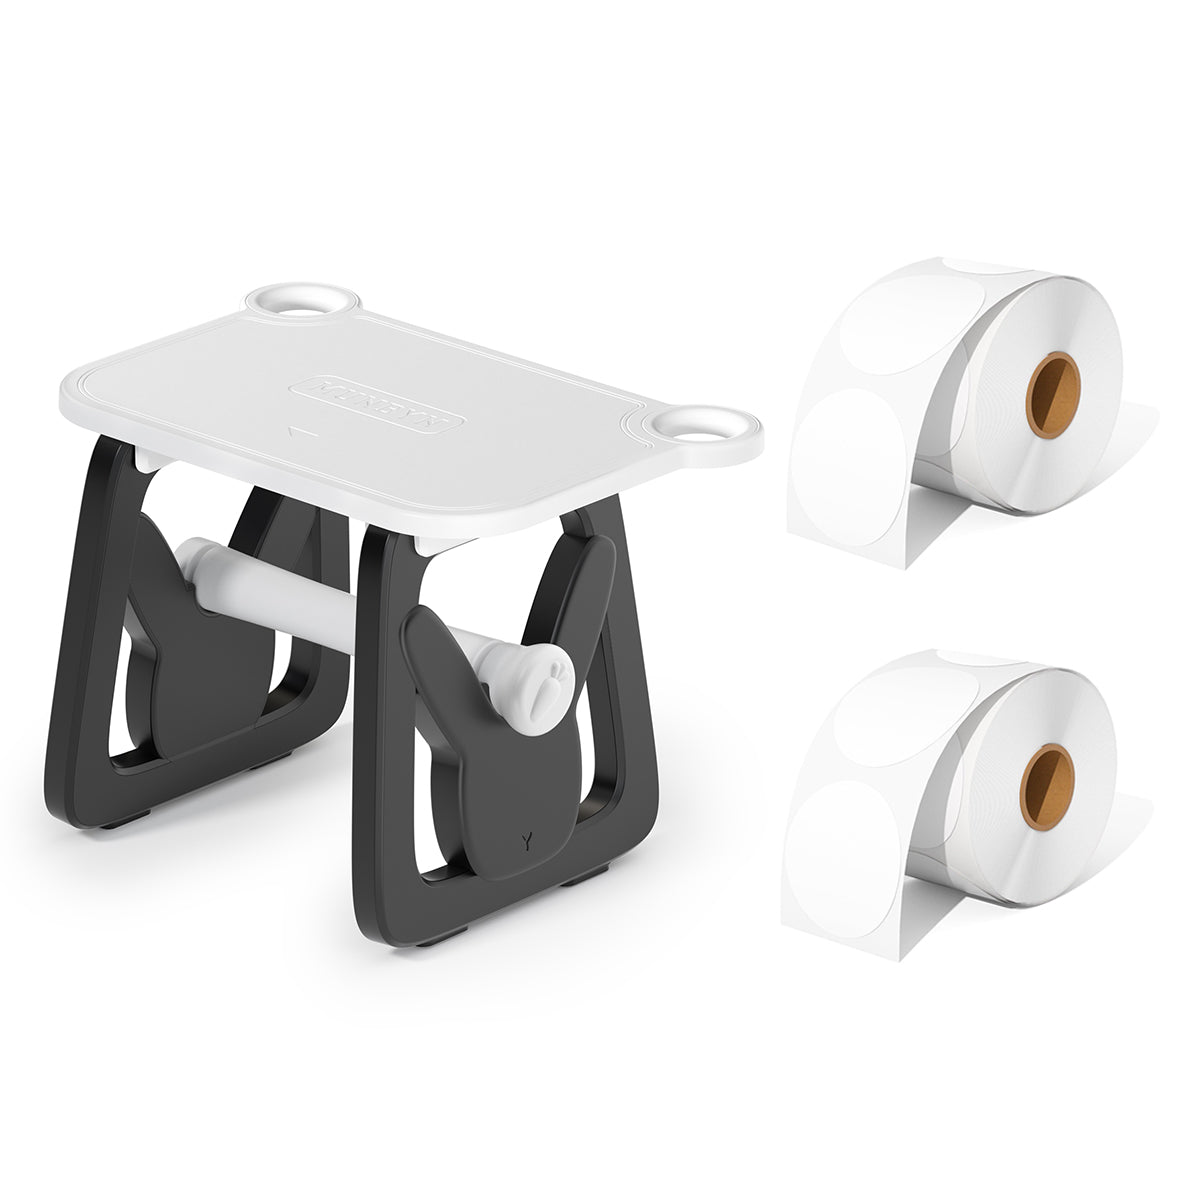 The label holder bundle includes a 3-in-1 black label holder and two rolls of thermal labels.